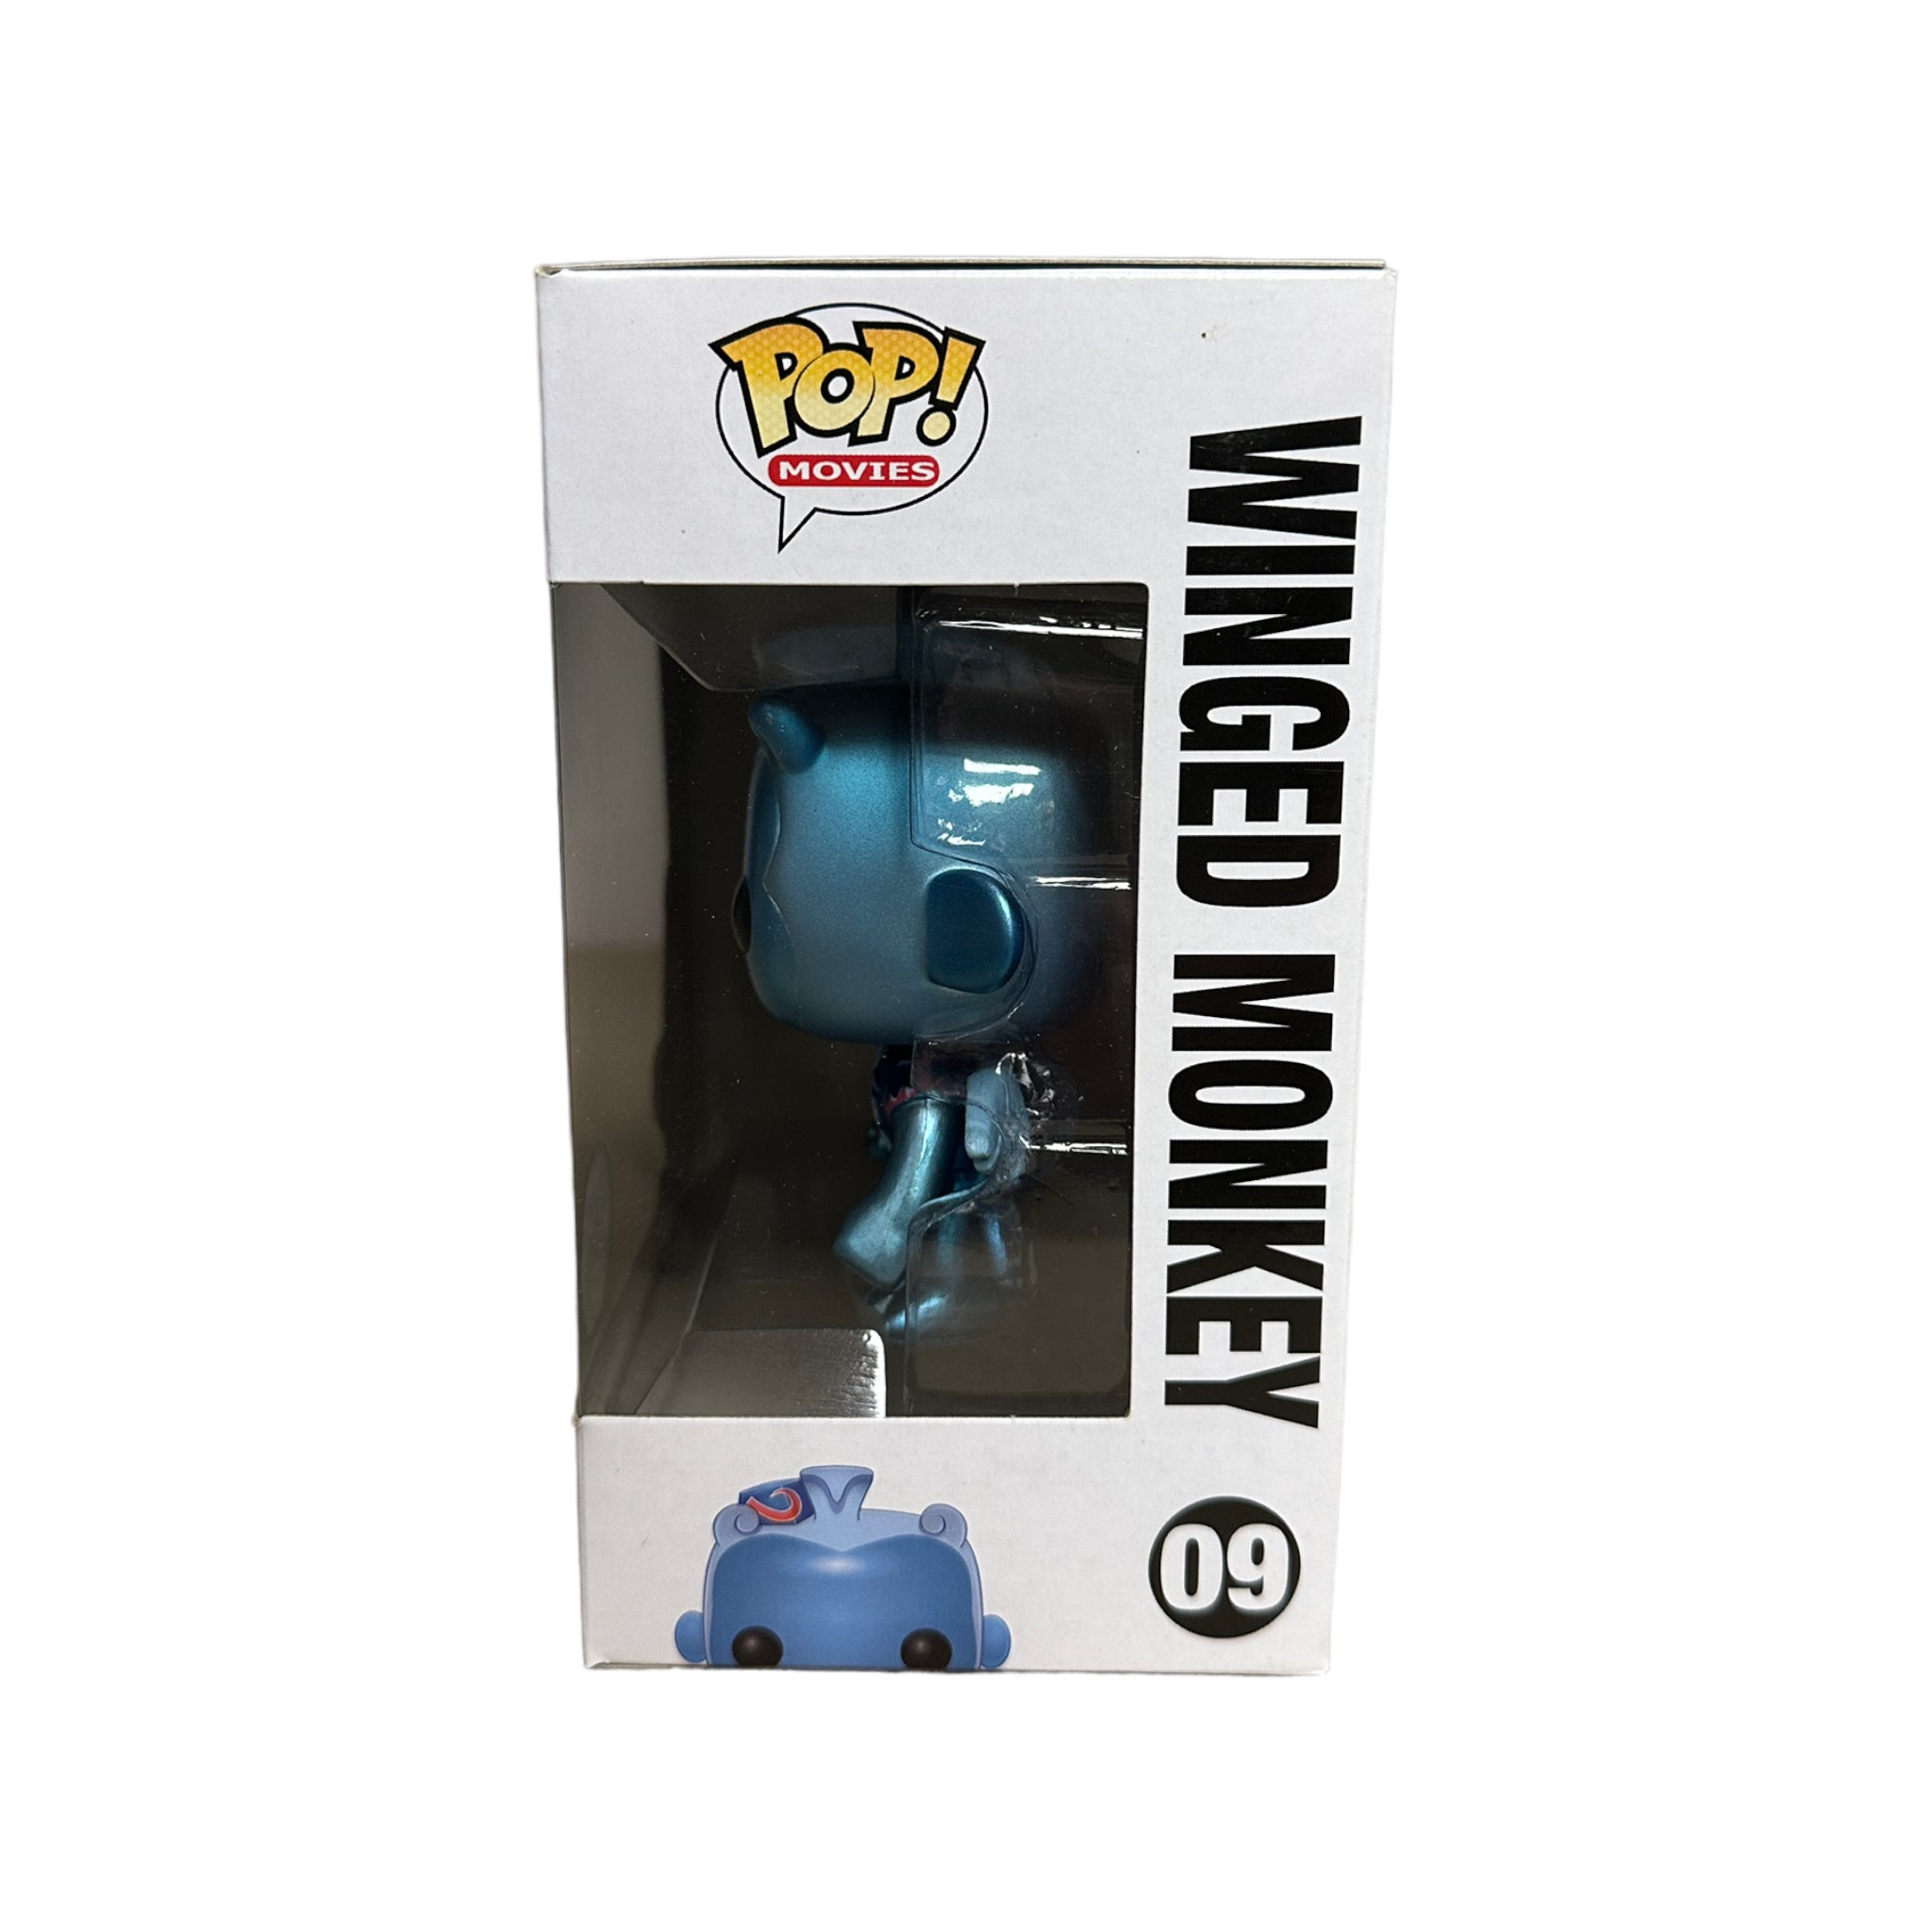 Winged Monkey #09 (Metallic) Funko Pop! - The Wizard of Oz - SDCC 2011 Exclusive LE480 Pcs - Condition 8.75/10